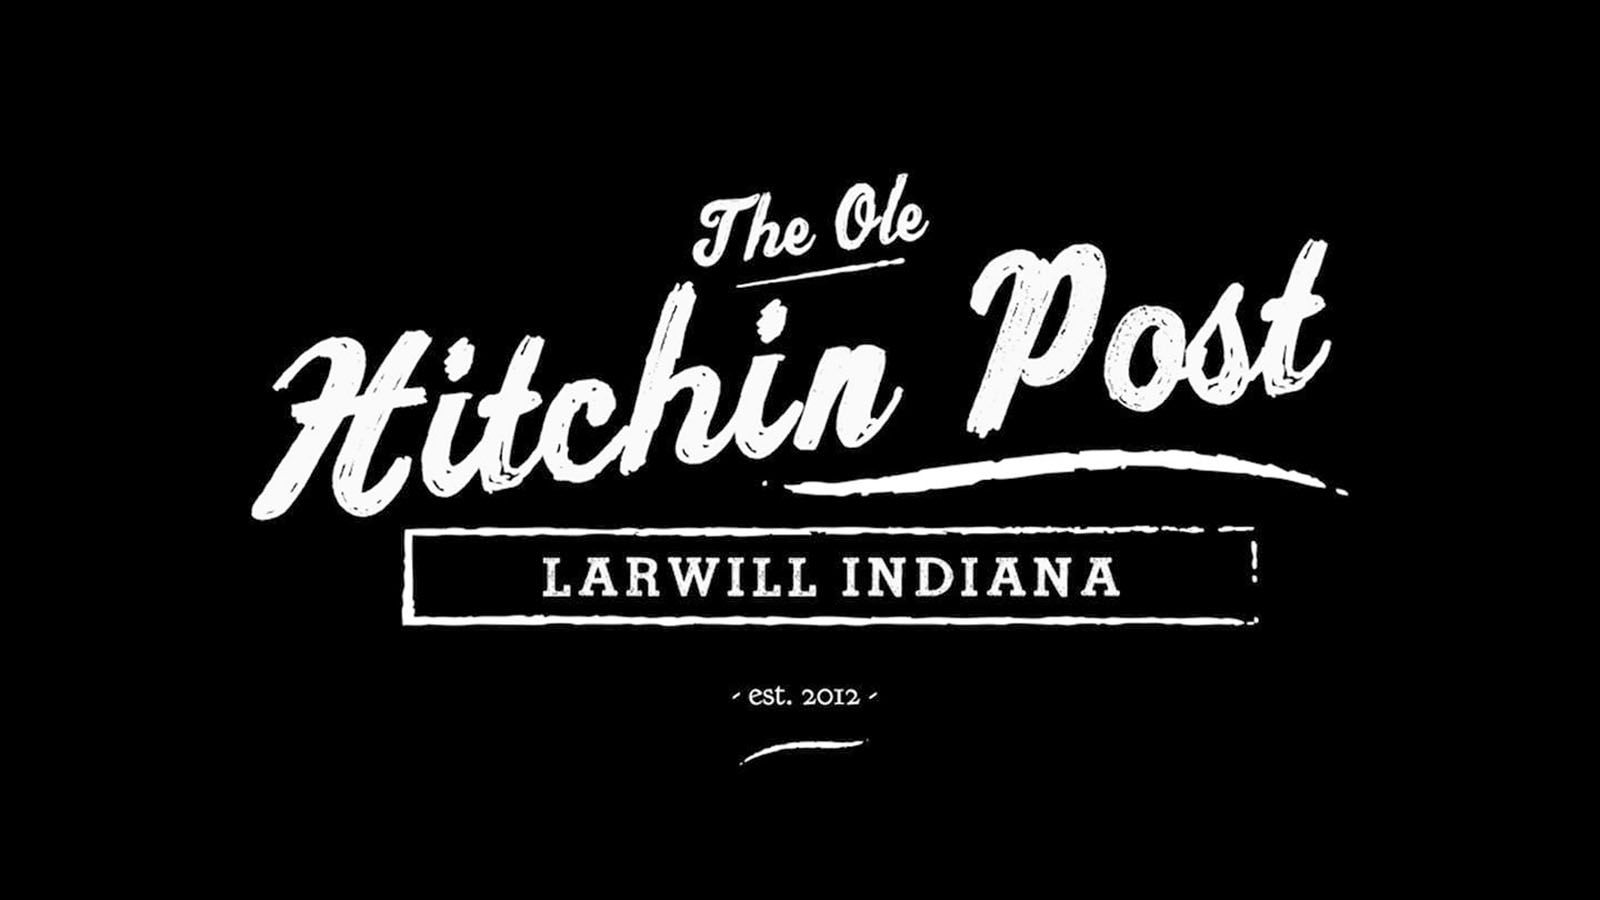 The Ole Hitchin' Post will be closed as its owner battles cancer.